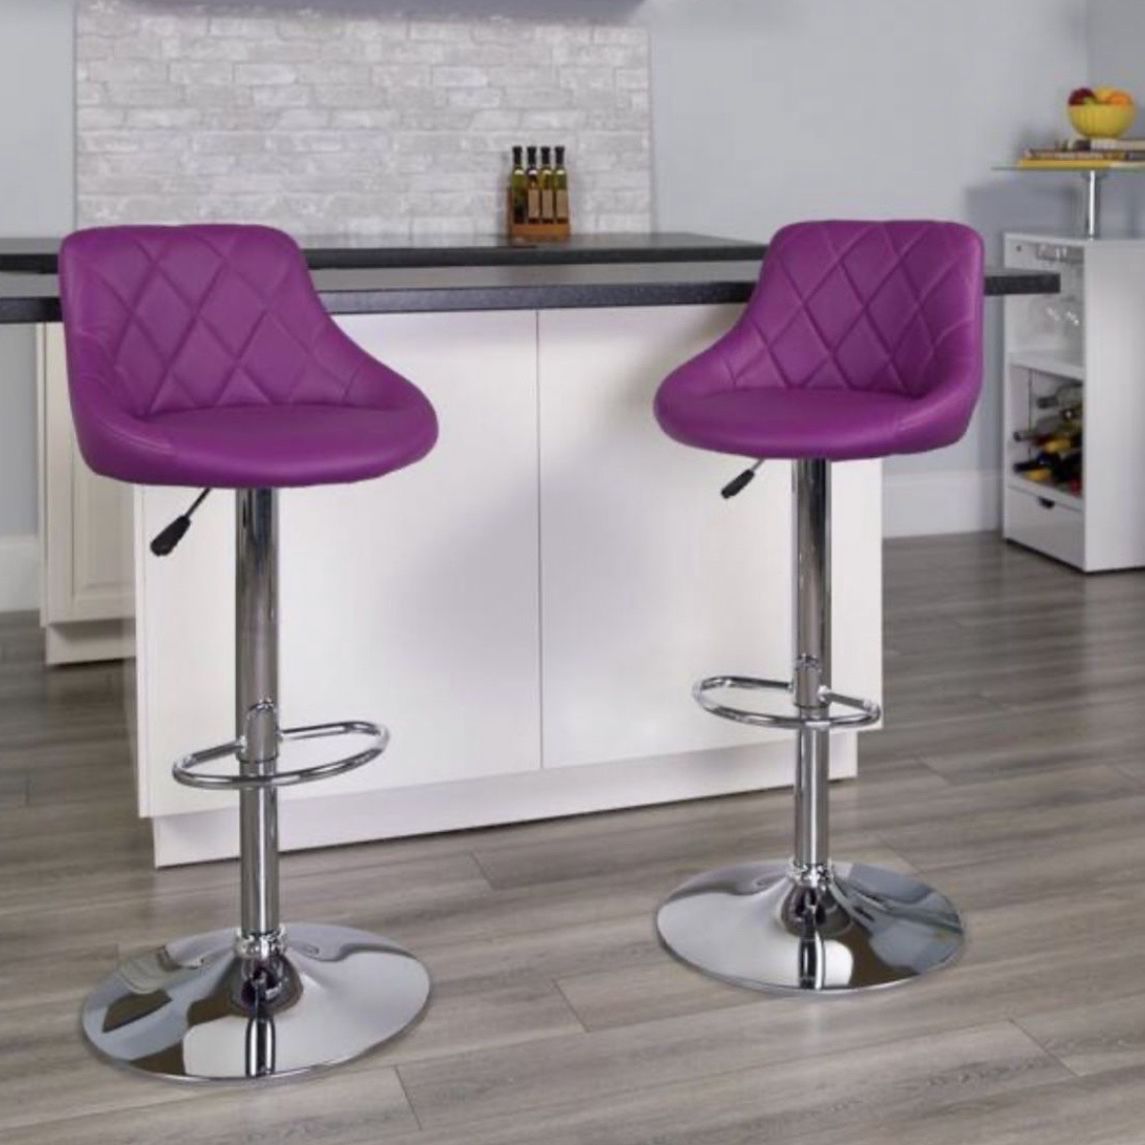 32 in. Adjustable Height Purple Cushioned Bar Stool (2 Pack)